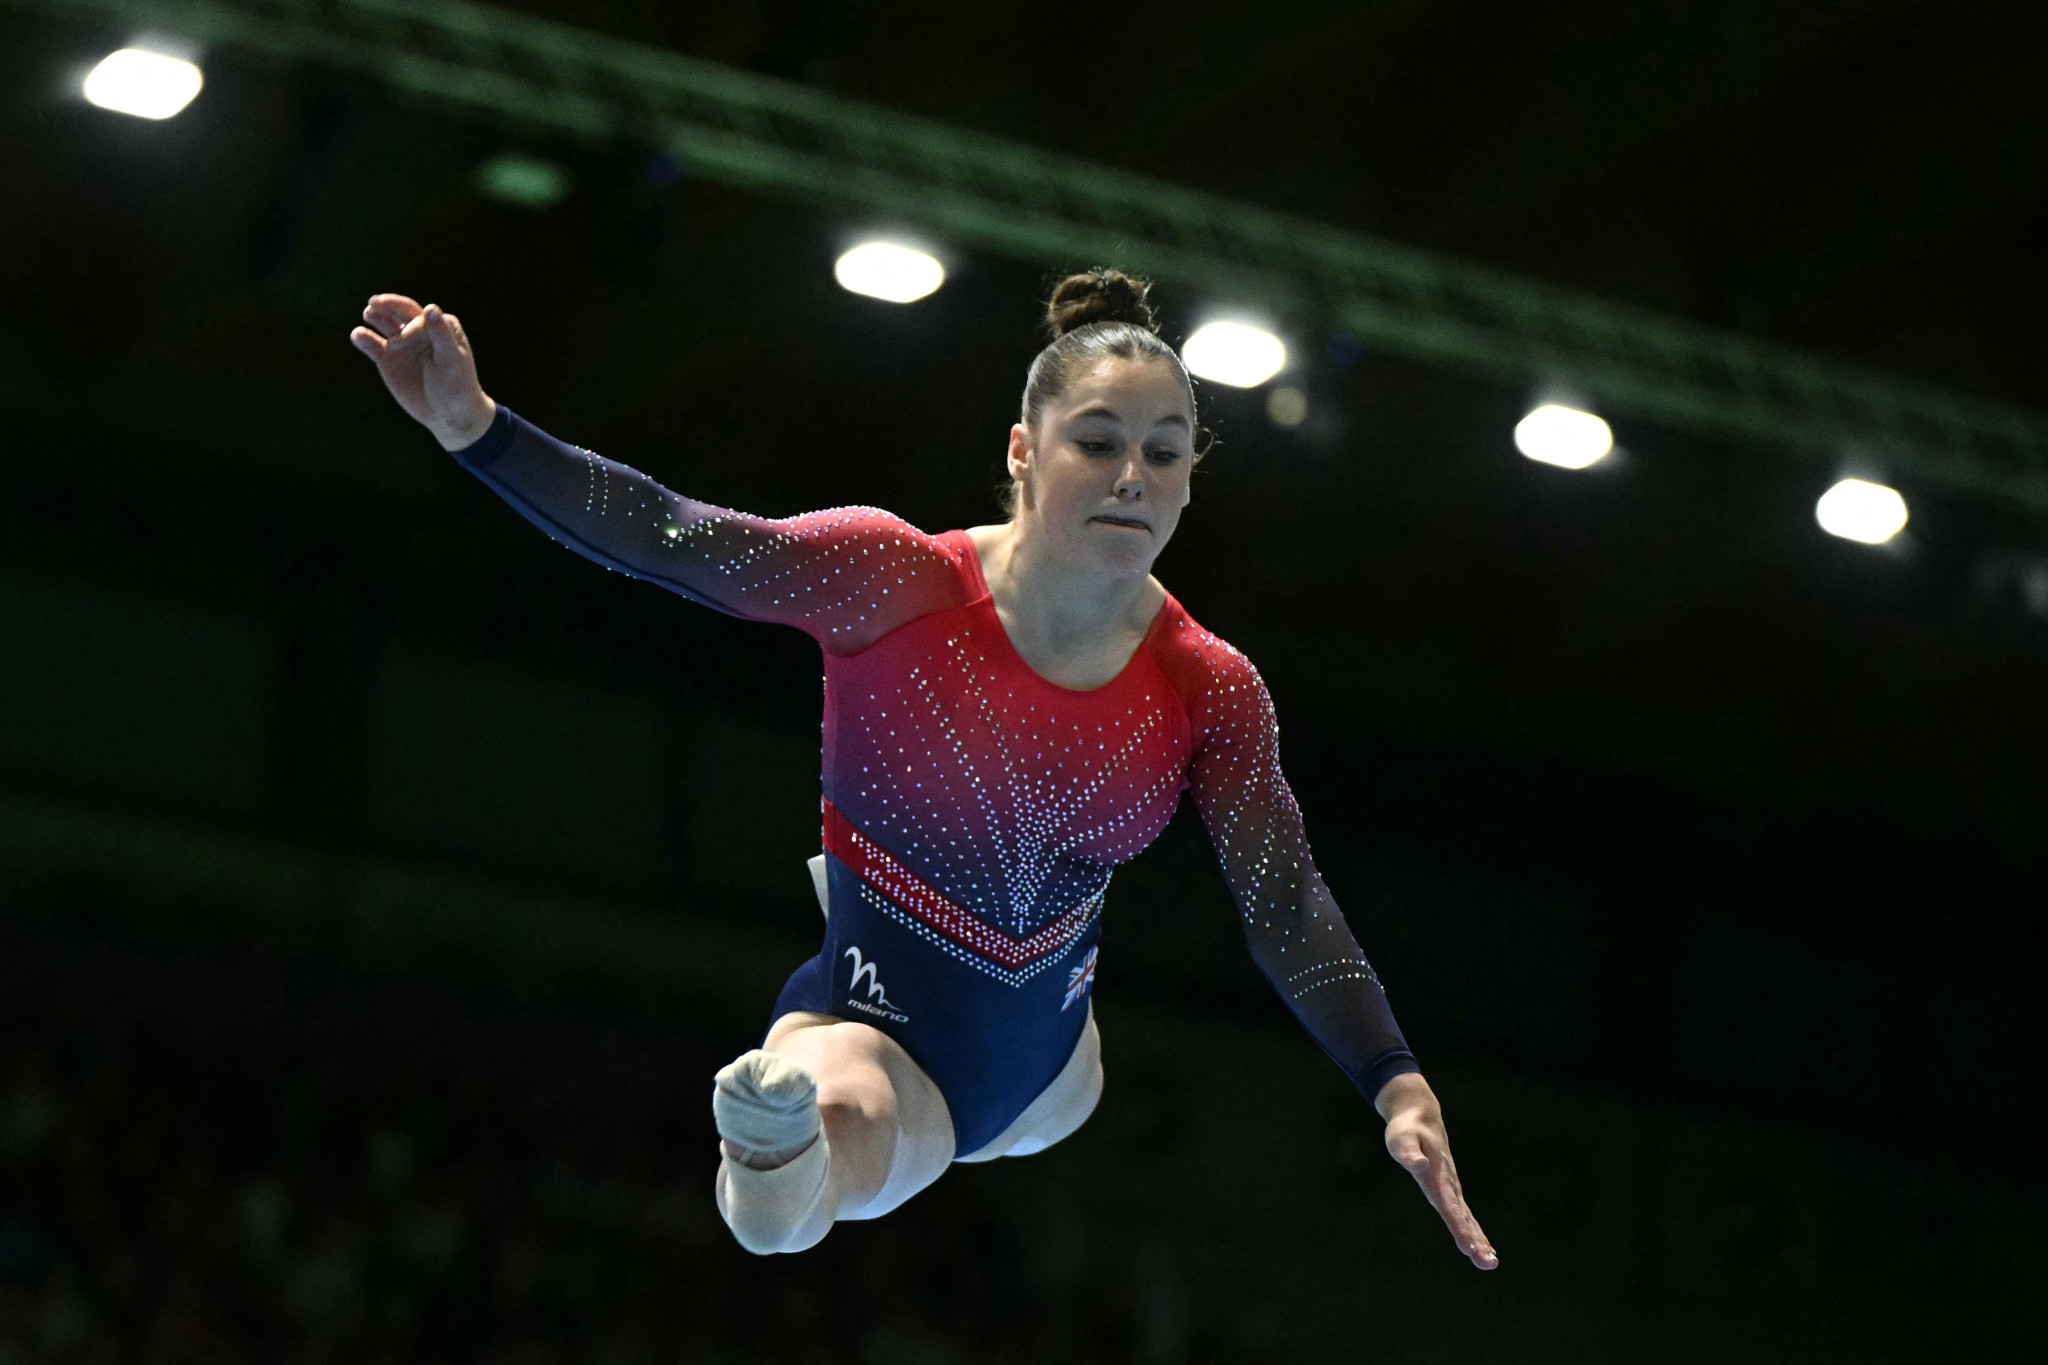 Abigail Martin is set to make her Olympic debut in Paris, having recently completed her GCSEs. GETTY IMAGES